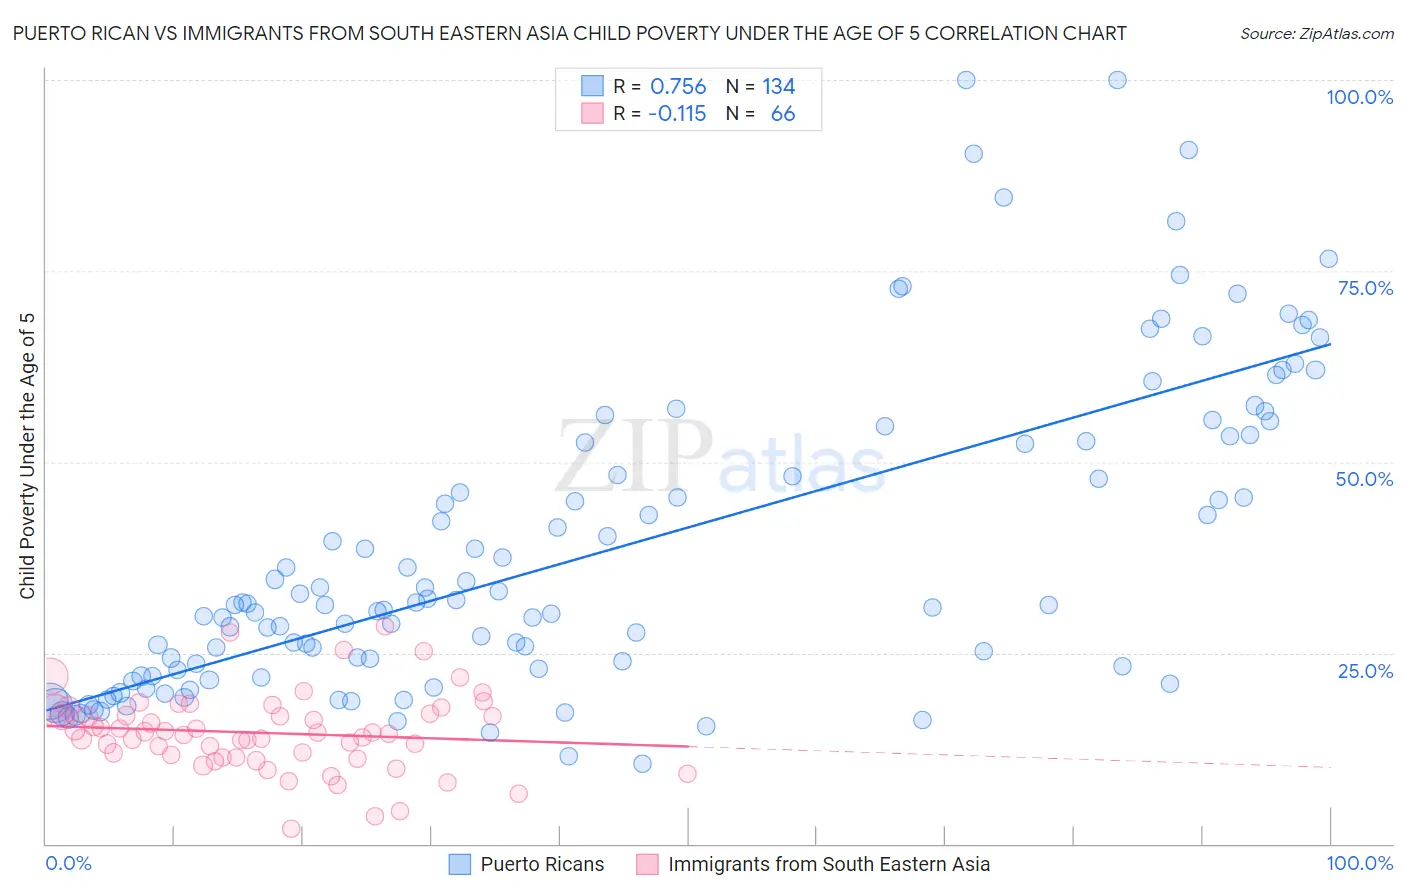 Puerto Rican vs Immigrants from South Eastern Asia Child Poverty Under the Age of 5